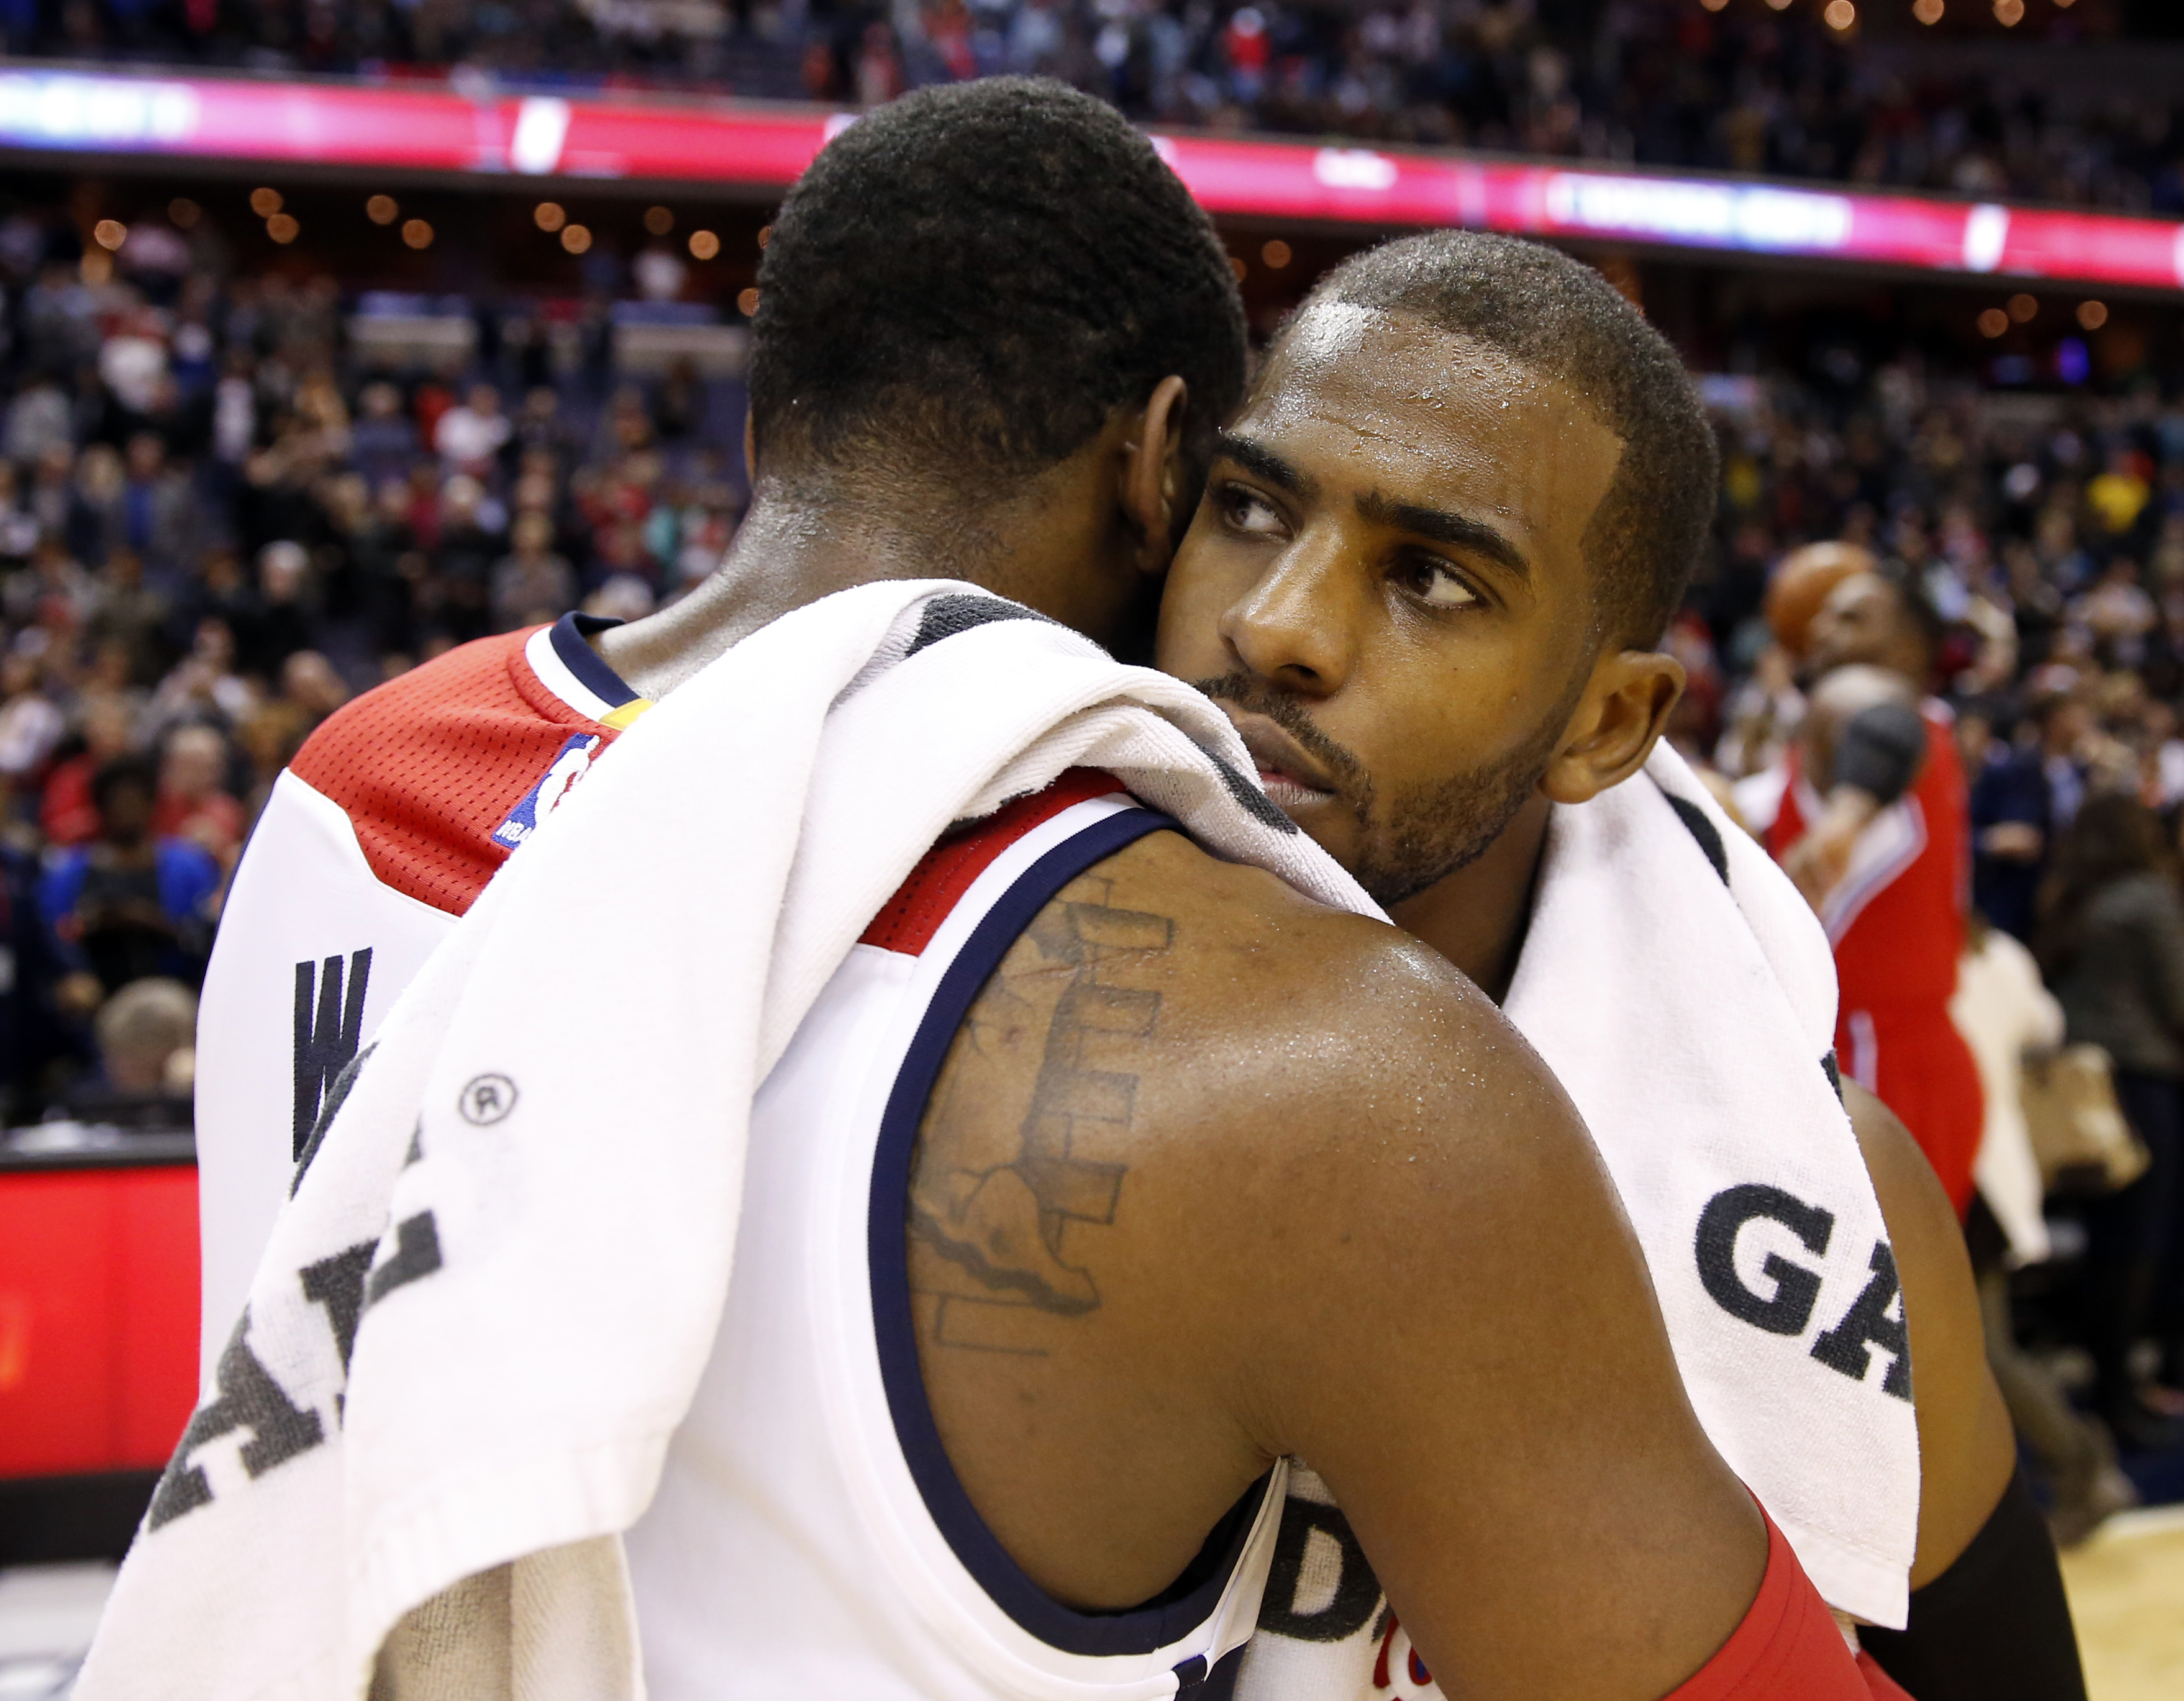 John Wall's first Clippers start likely to come against Wizards